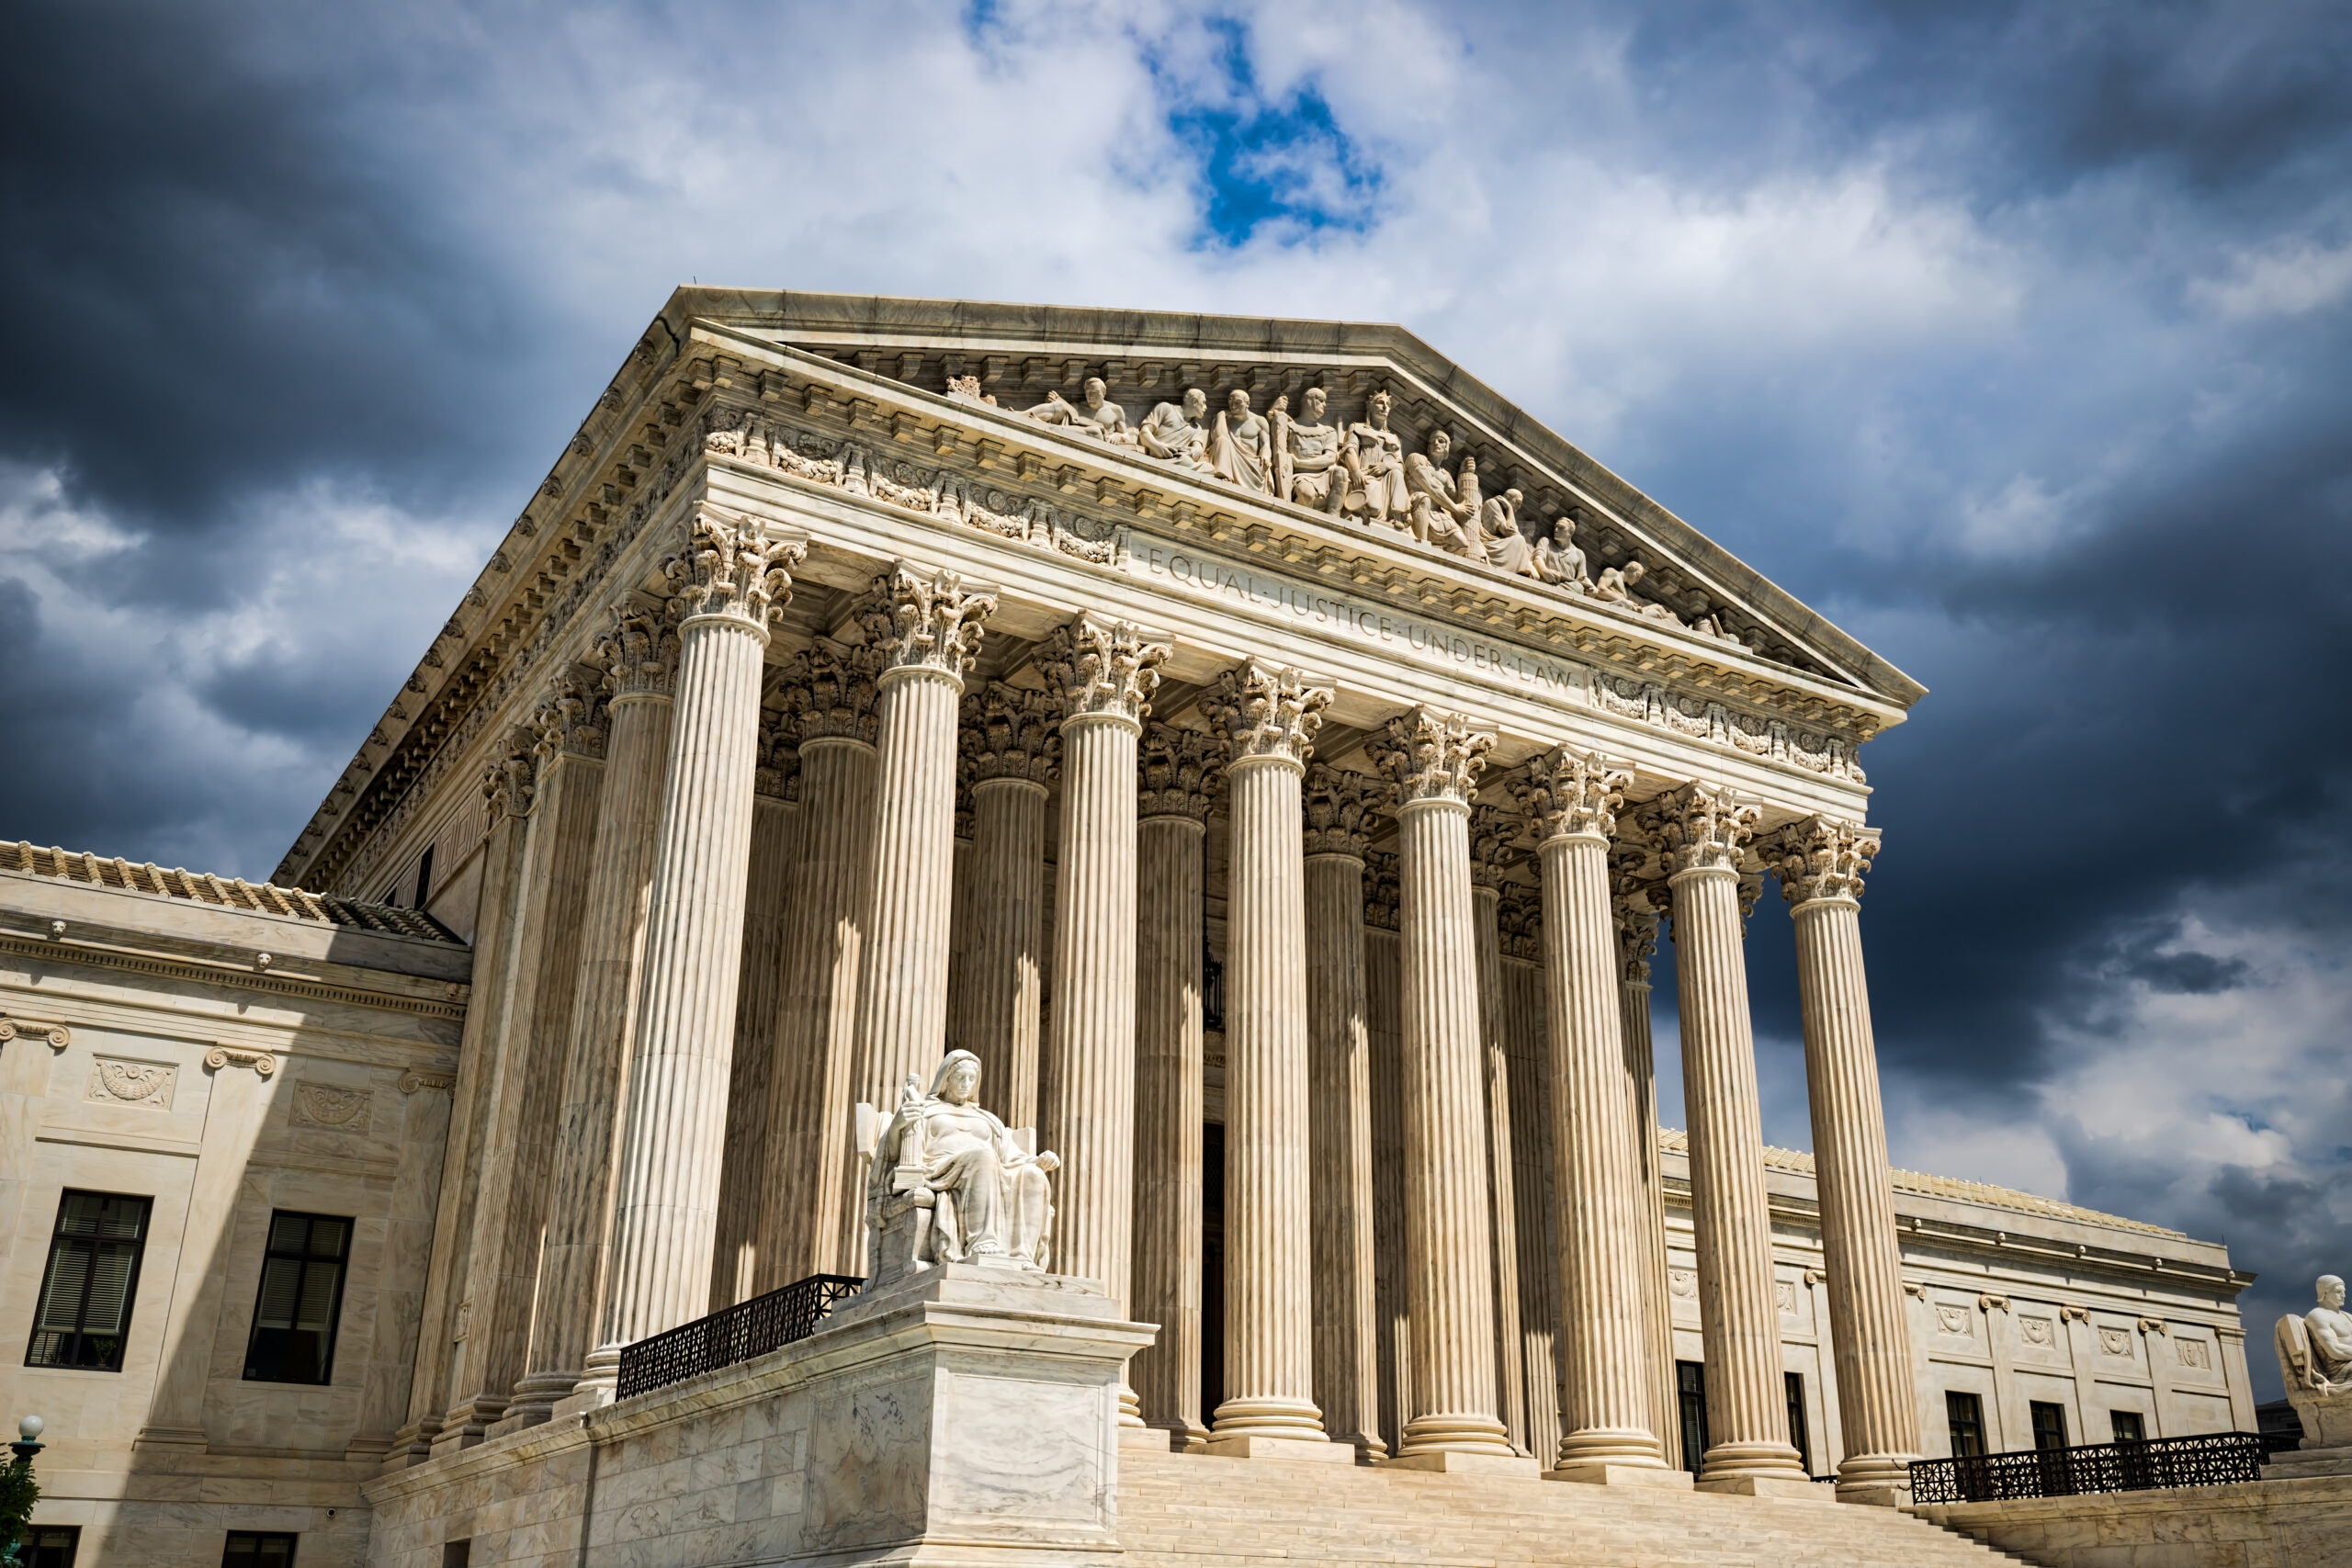 Growth Energy and RFA petitioned the Supreme Court to consider overturning a ruling from the Fifth Circuit granting a group of small refinery exemptions.